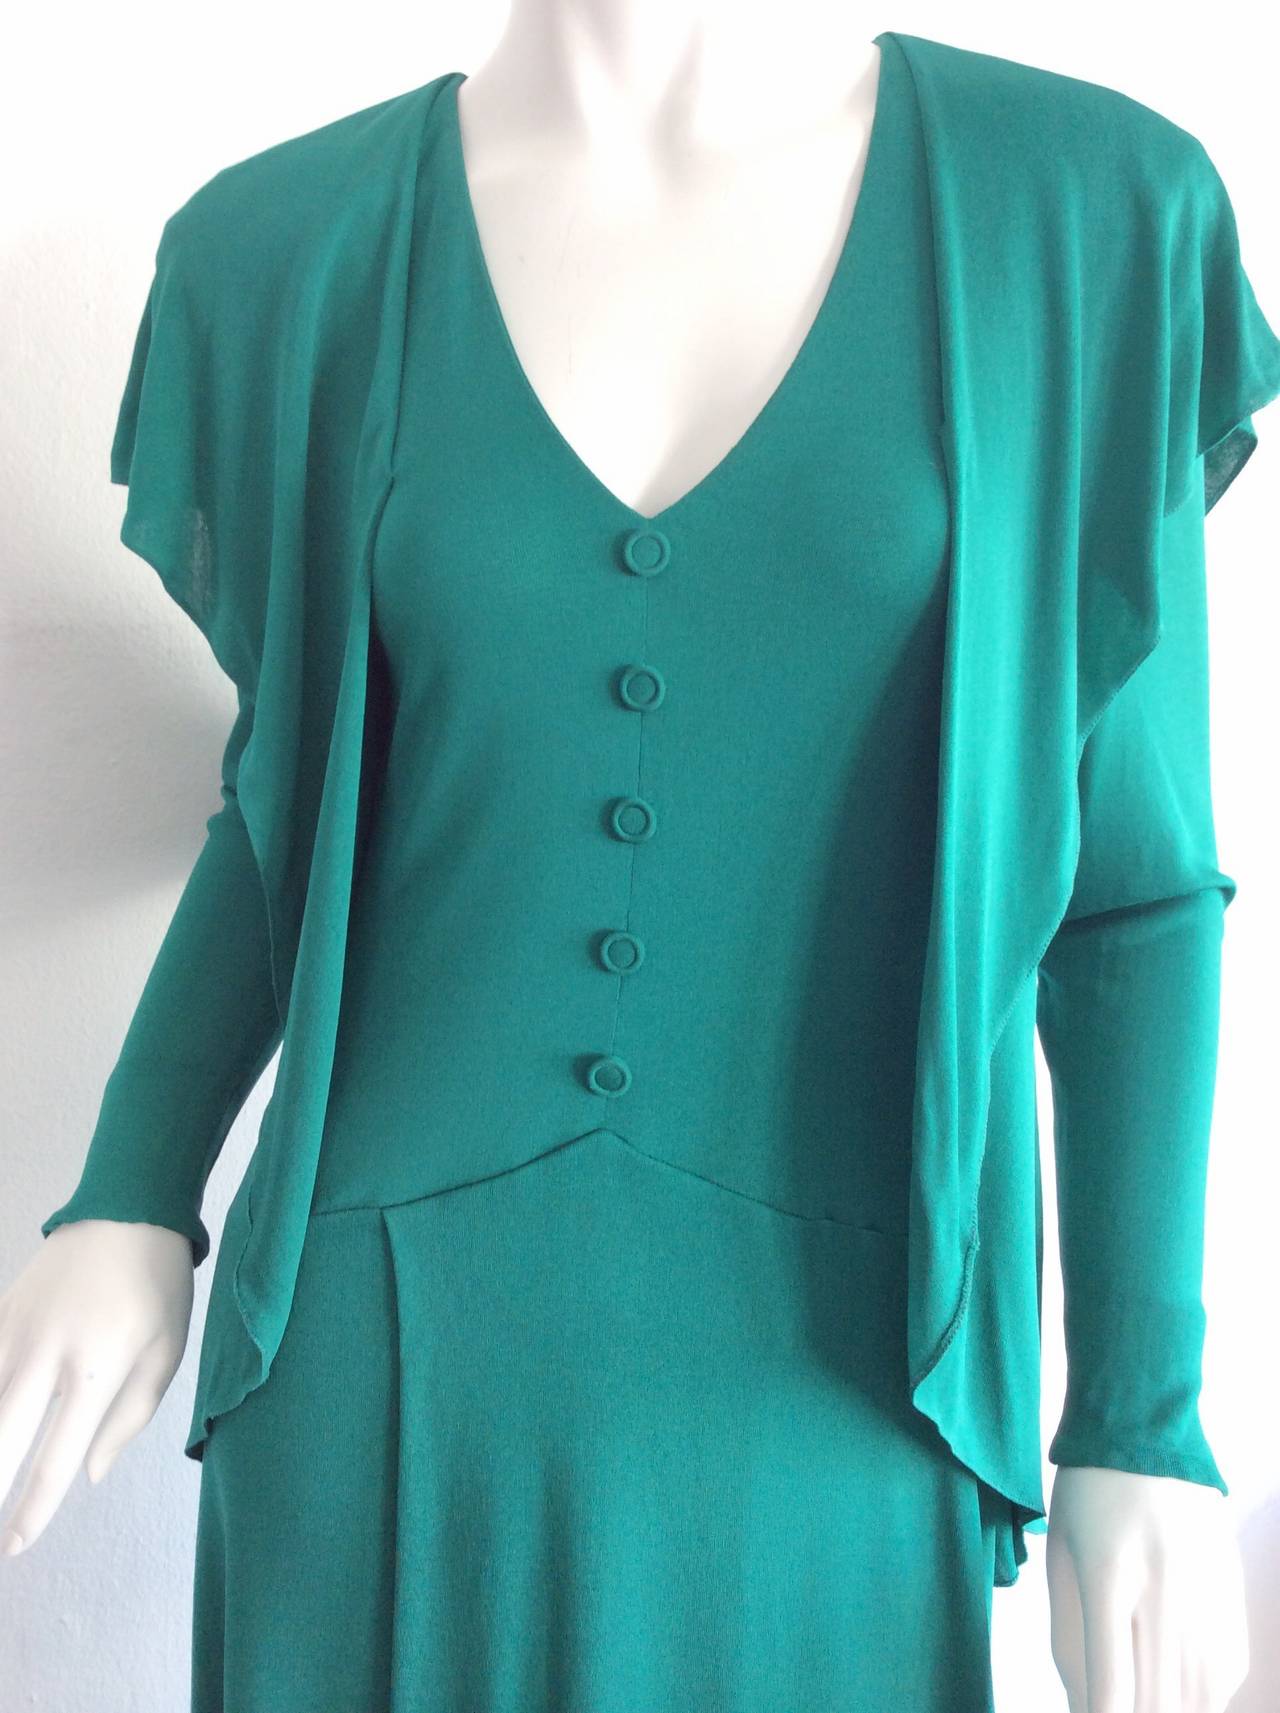 Romantic, and boho vintage Holly's Harp dress!  Vivid Kelly Green color. With mock silk jersey covered buttons up bodice. Romantic tiers, with a built in cape. Brand new, never worn. Marked Size Petite. Will fit Small-Medium, due to stretch

36-40